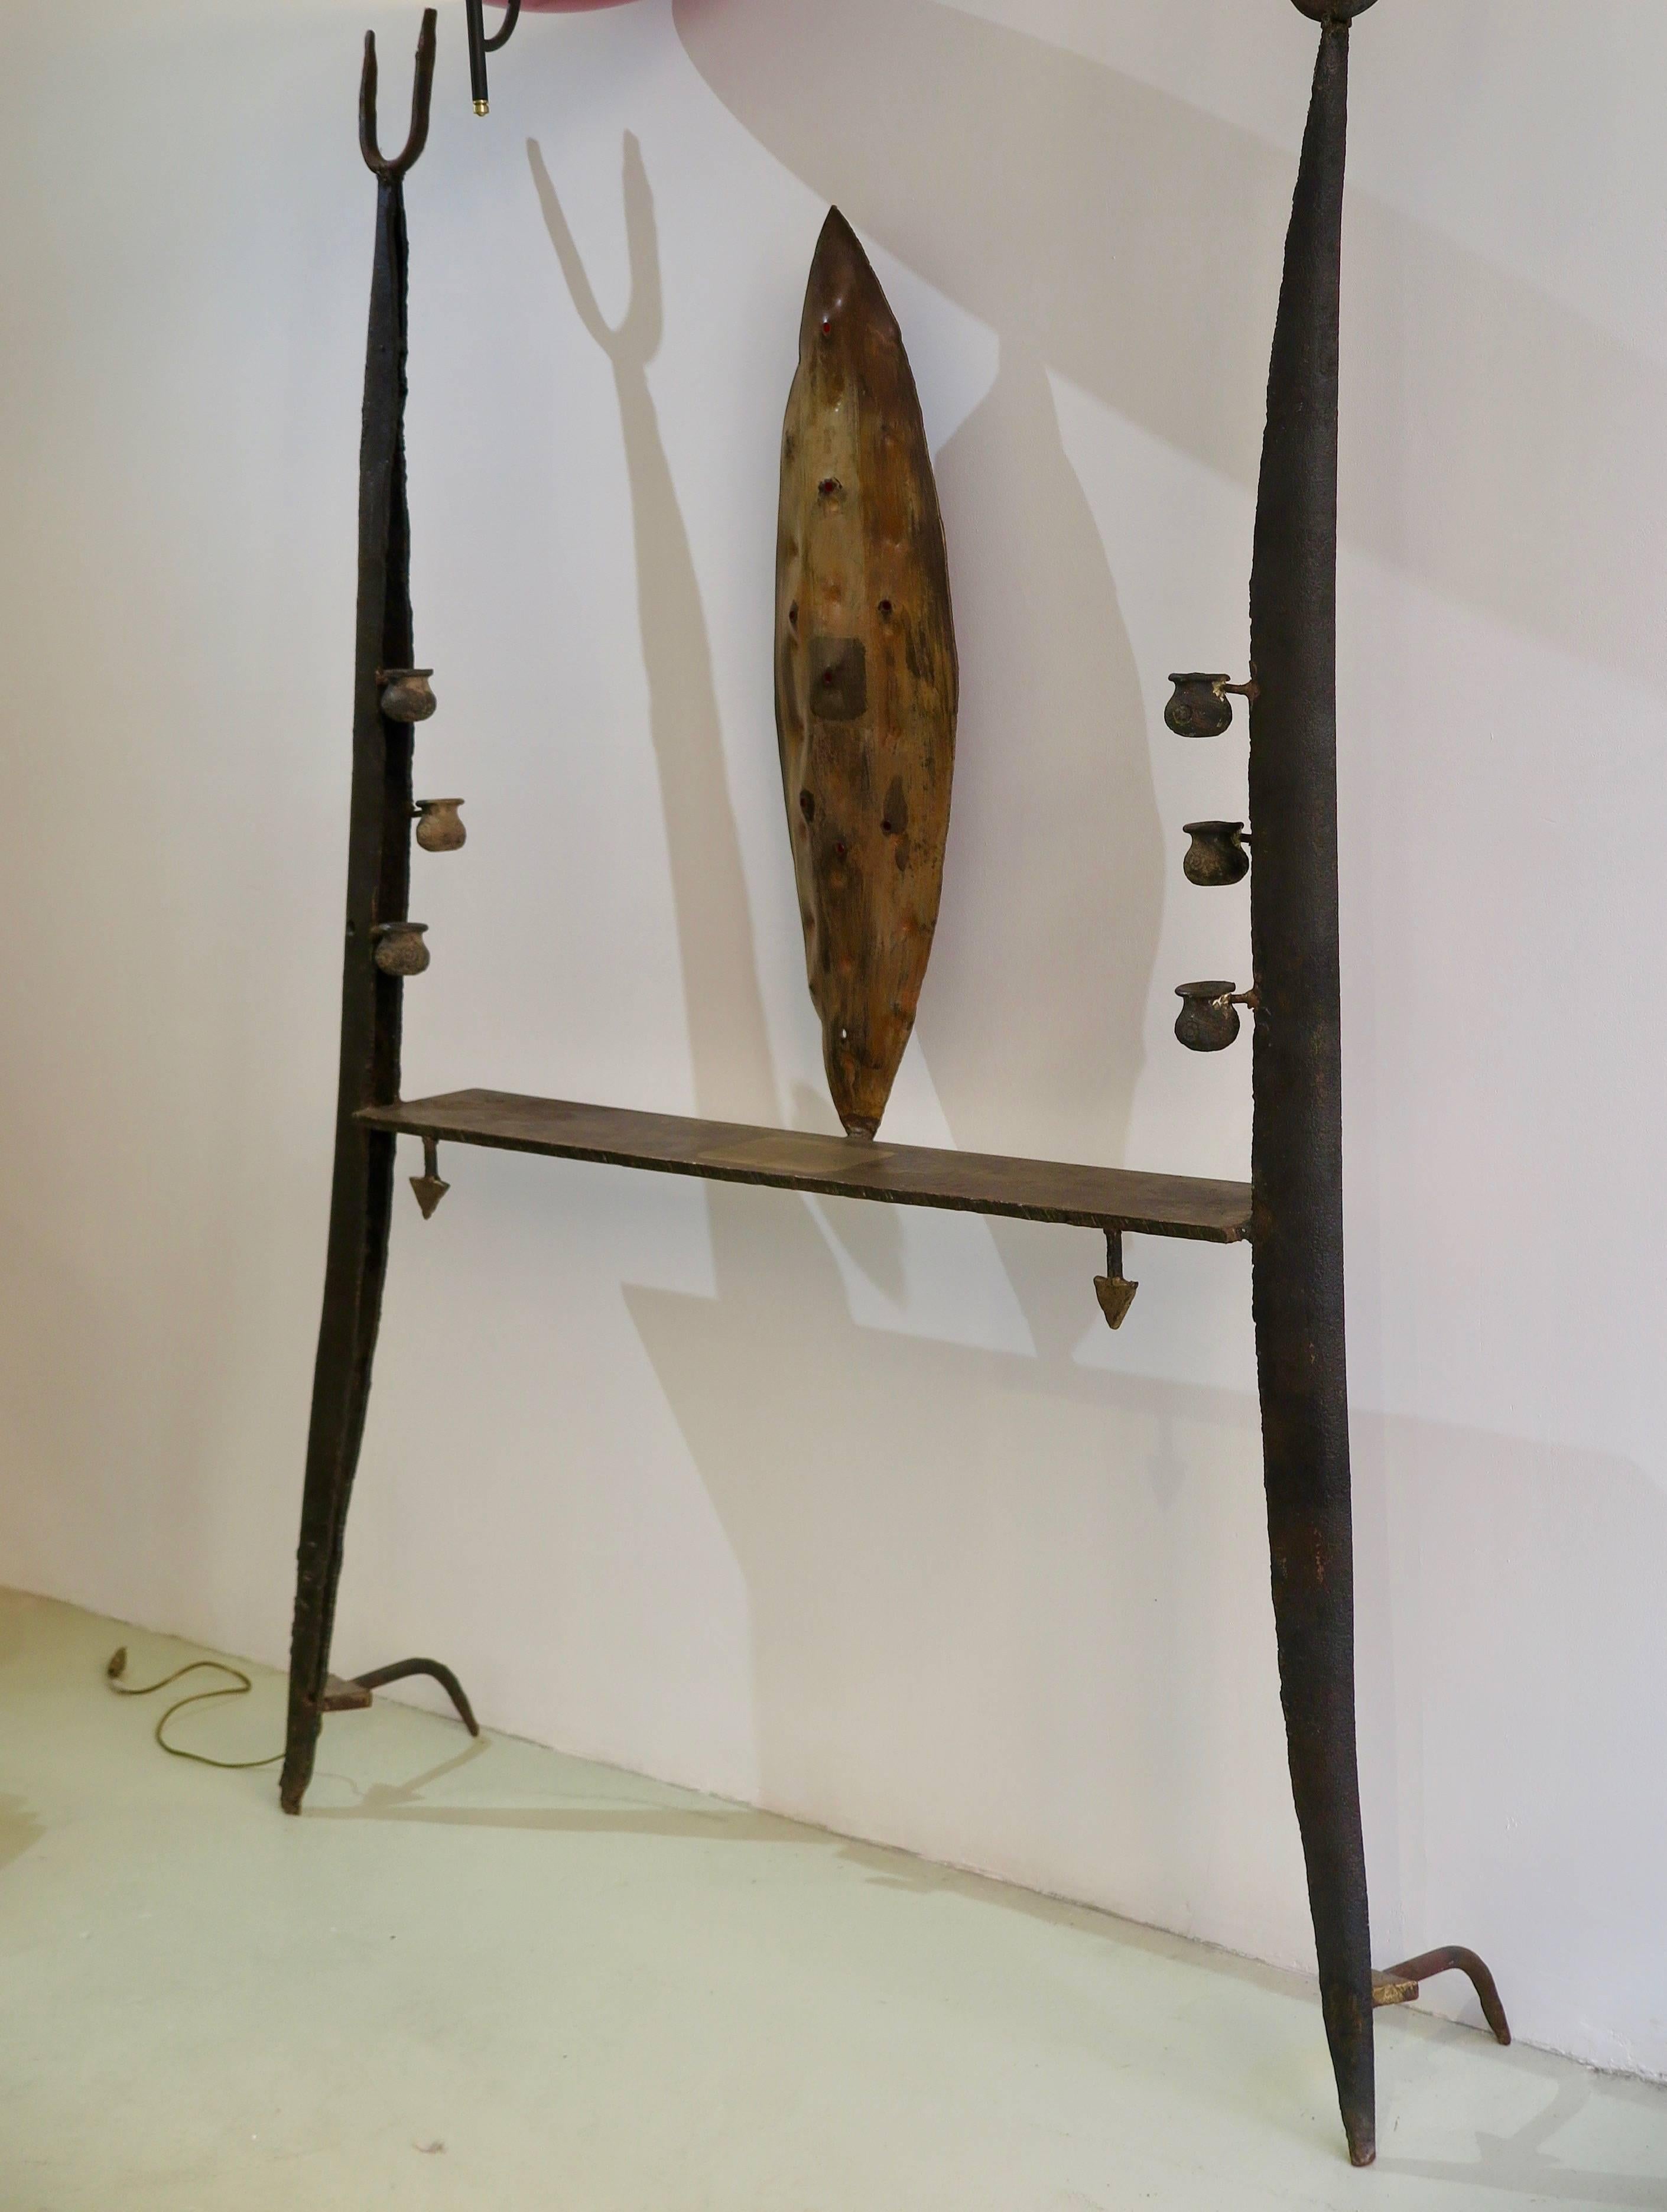 Unique large wall console or sculpture in bronze and iron by Jean-Jacques Argueyrolles, (1954) France, 1996.The console is inspired by African Art and is decorated with 24 - carat gold leaf.
Electrified with red lights.
Signed on the right leg: